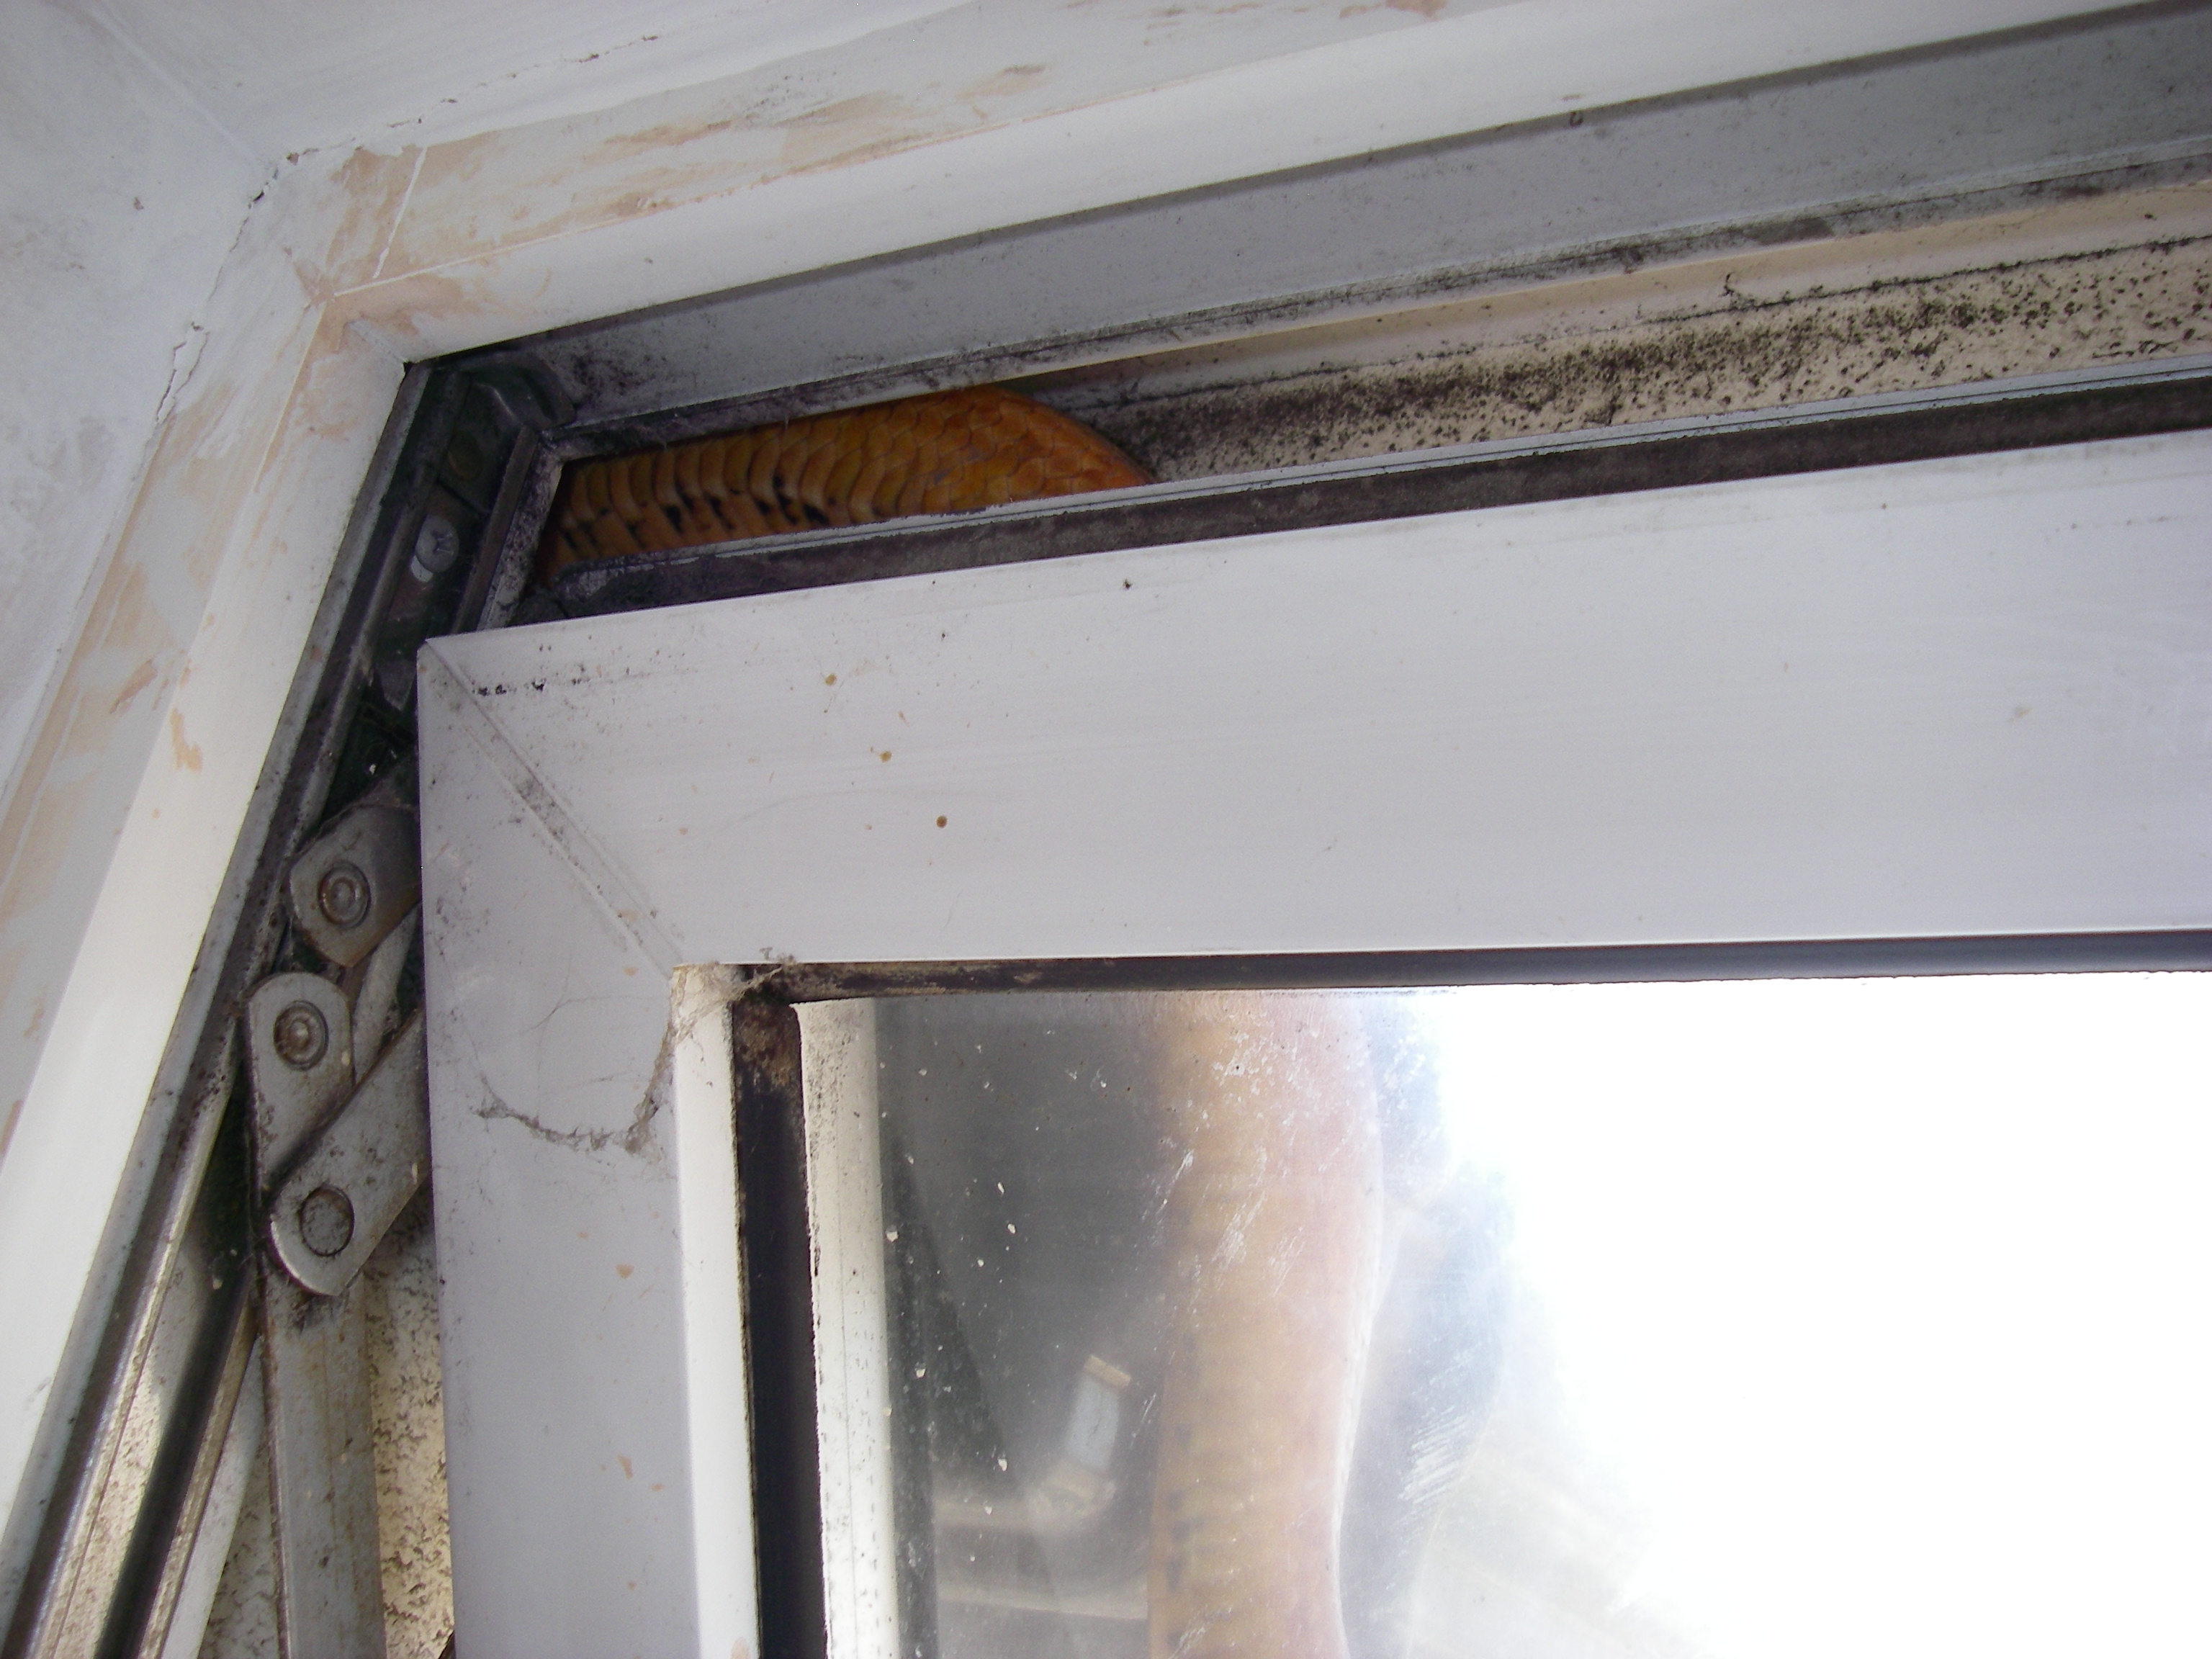 Snake visible through an upstairs window after escaping on to the roof of a home in Portsmouth (RSPCA)